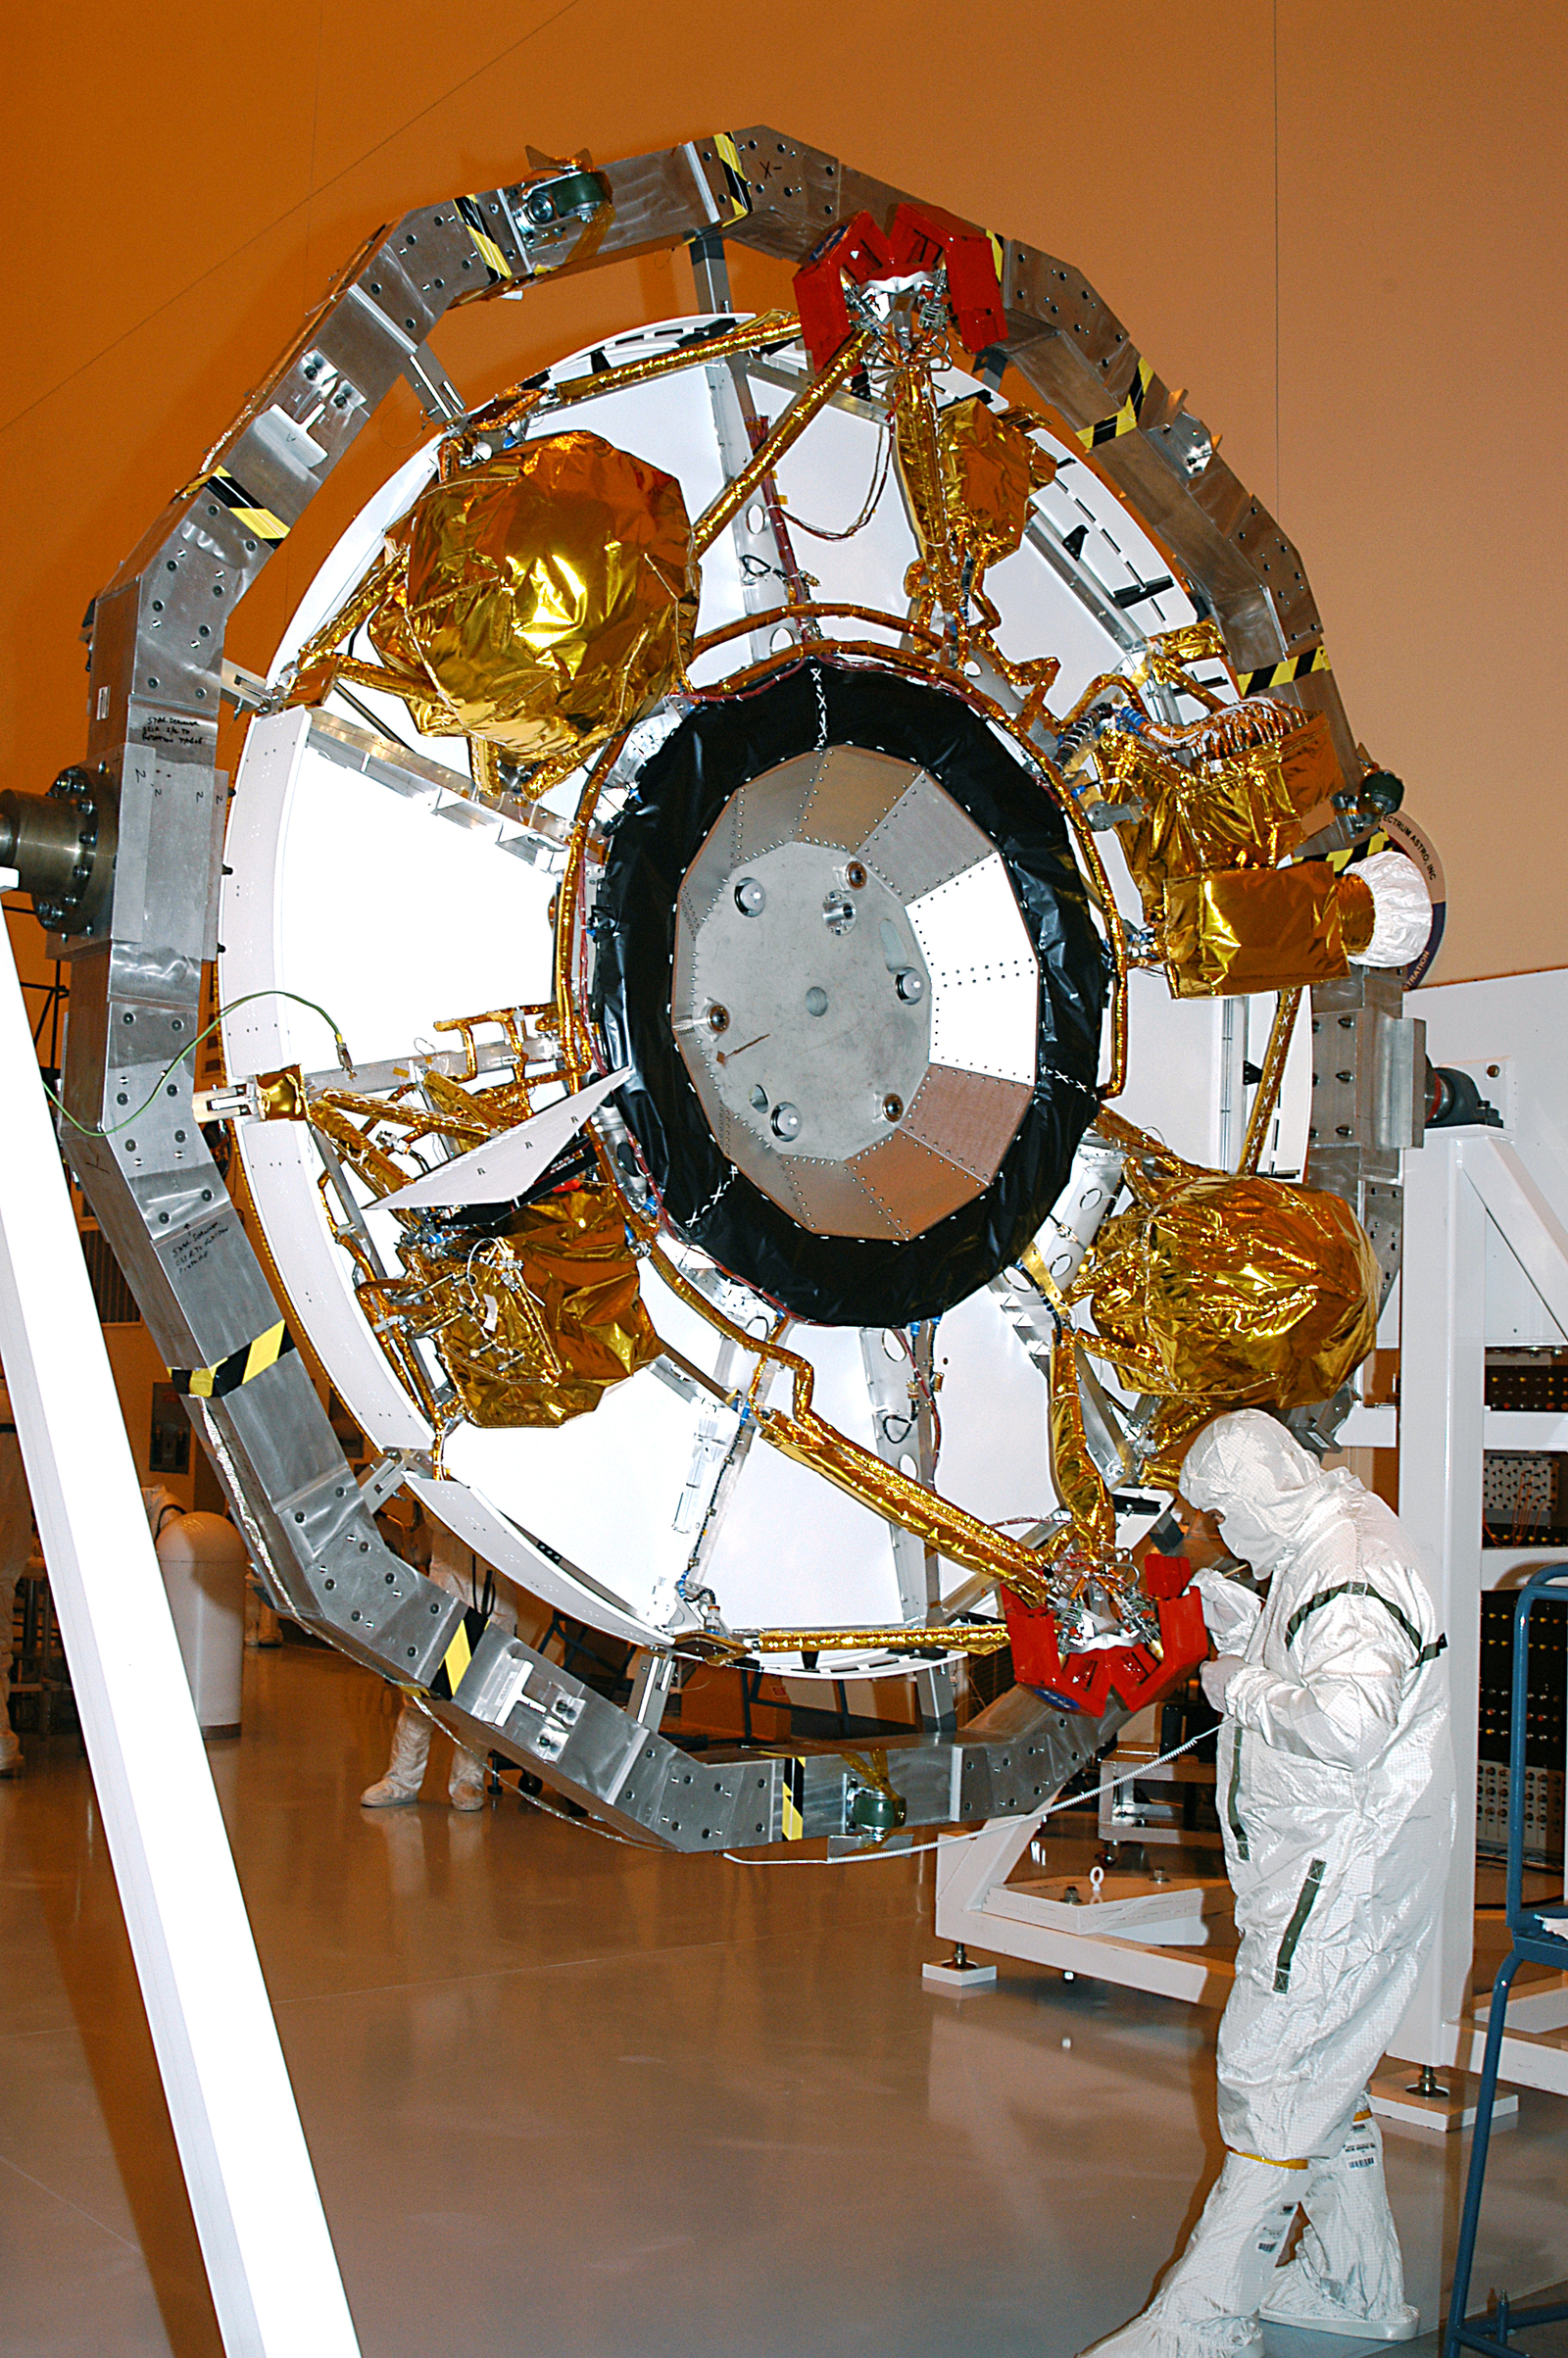 The aeroshell for Mars Exploration Rover 2 rests on end after rotation in the Payload Hazardous Servicing Facility.